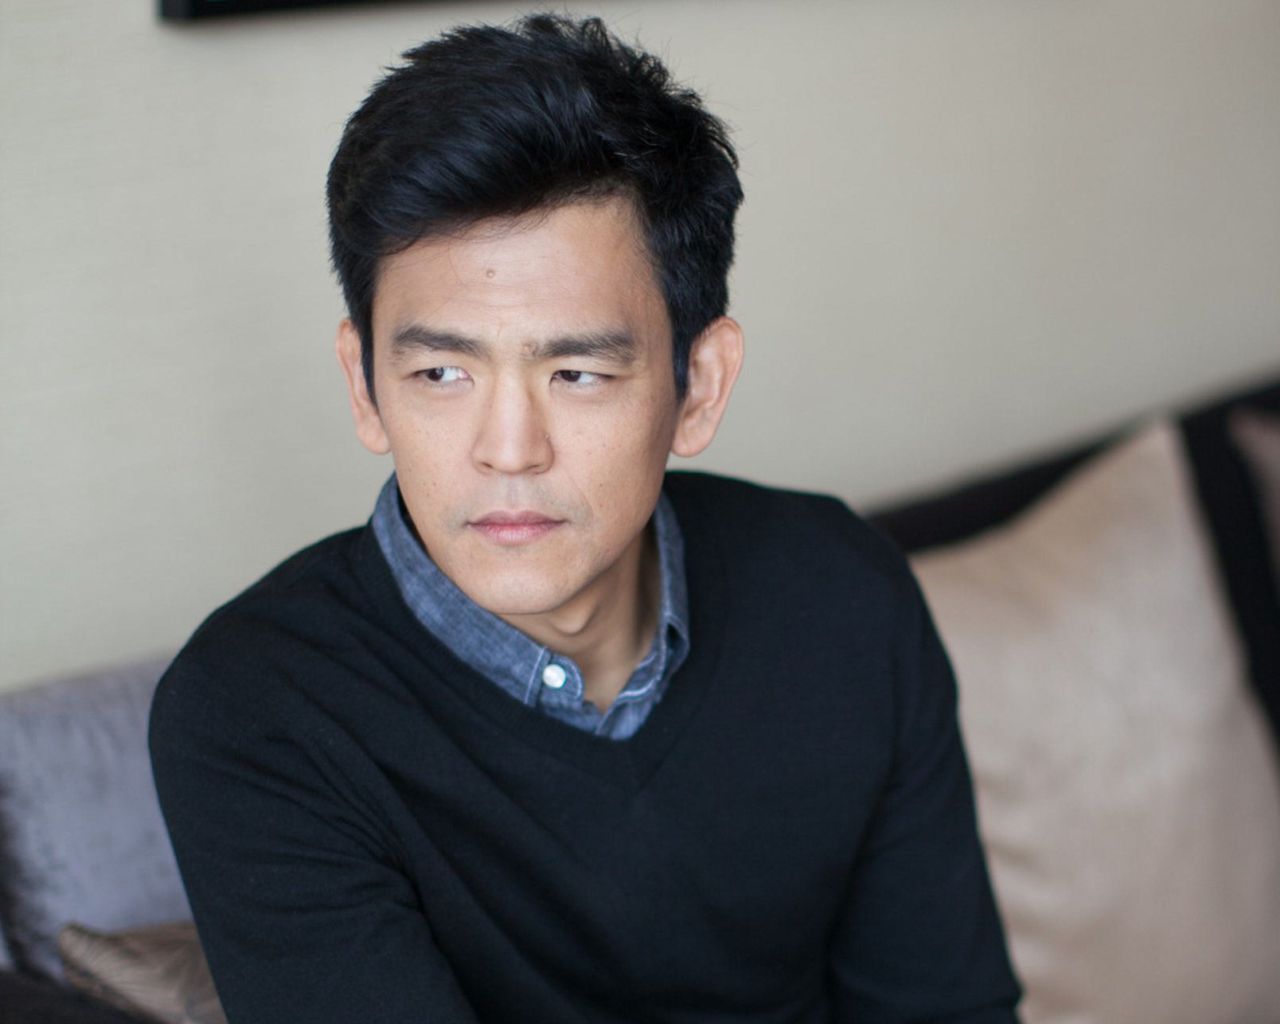 Star Trek's John Cho a boldly going actor worth shouting about: Howell